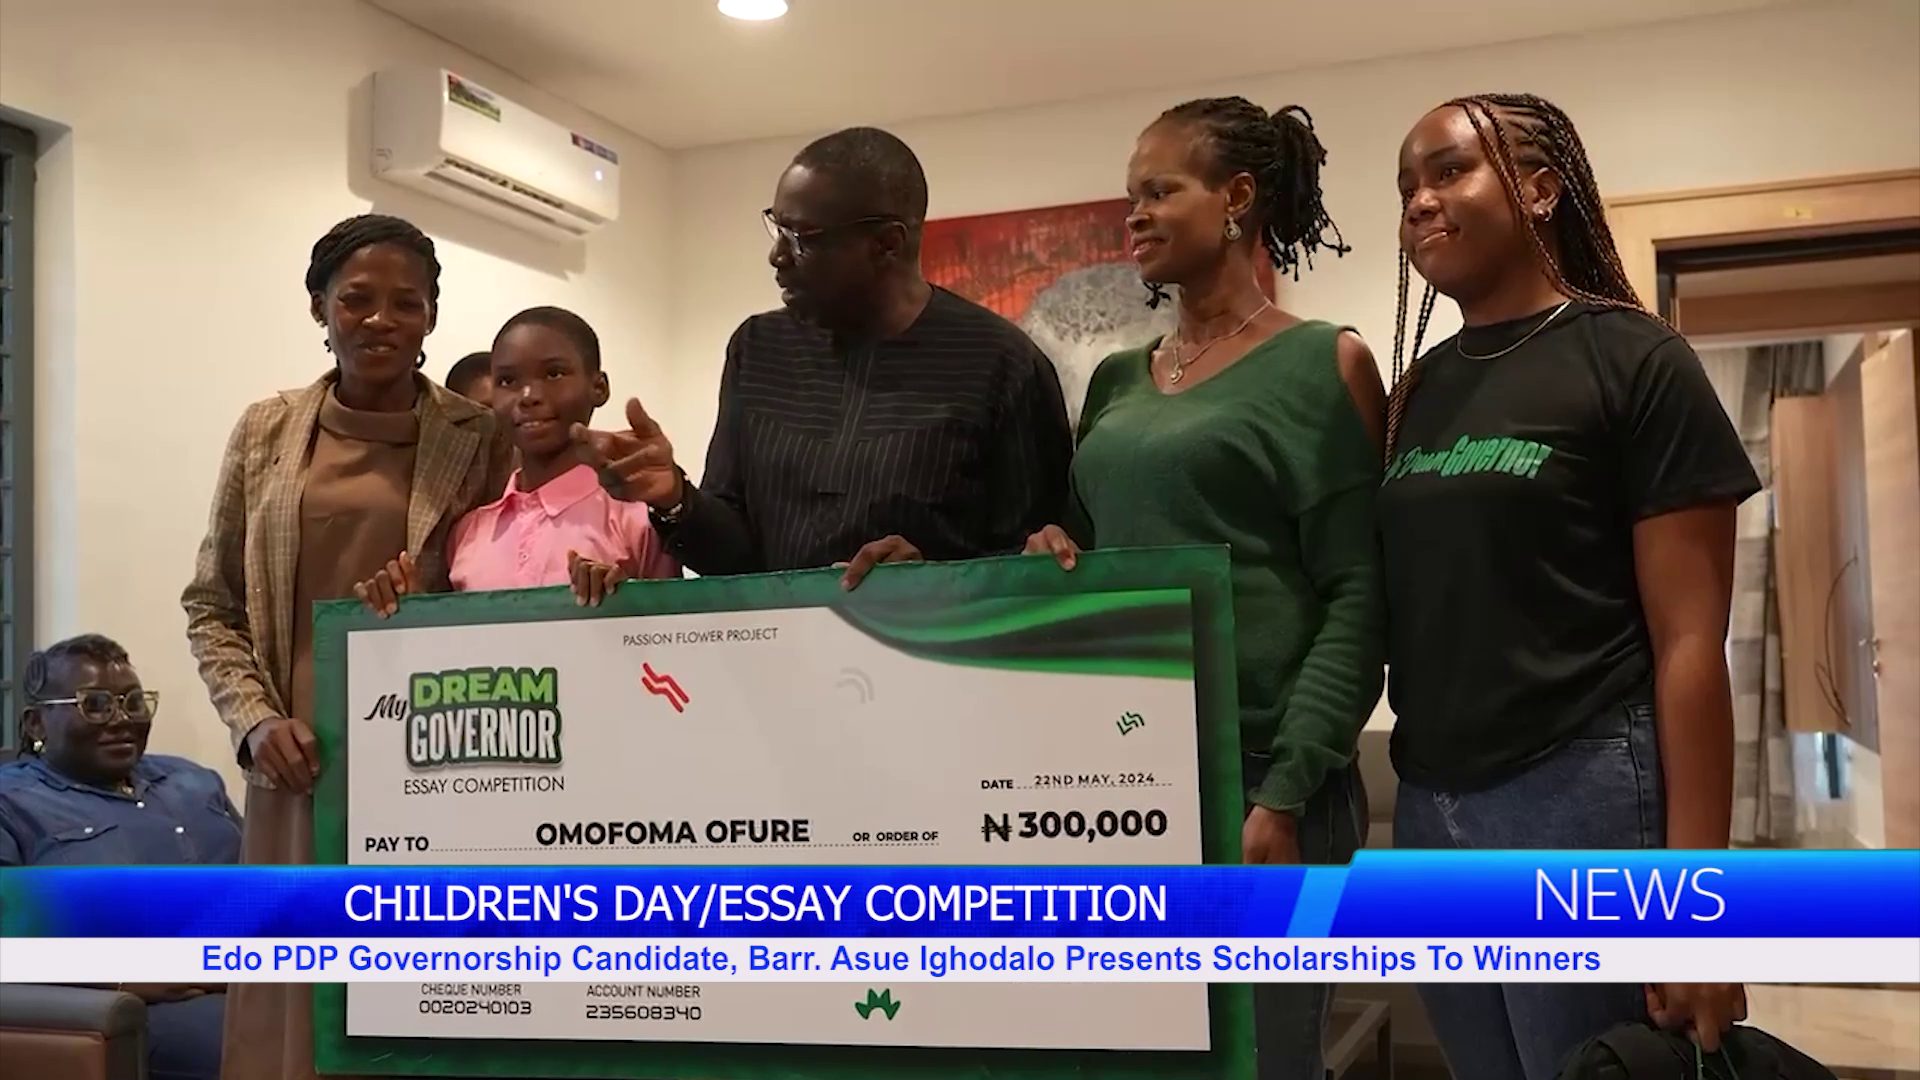 Edo PDP Governorship Candidate, Barr. Asue Ighodalo Presents Scholarship To Winners Of Children’s Day/Essay Competition